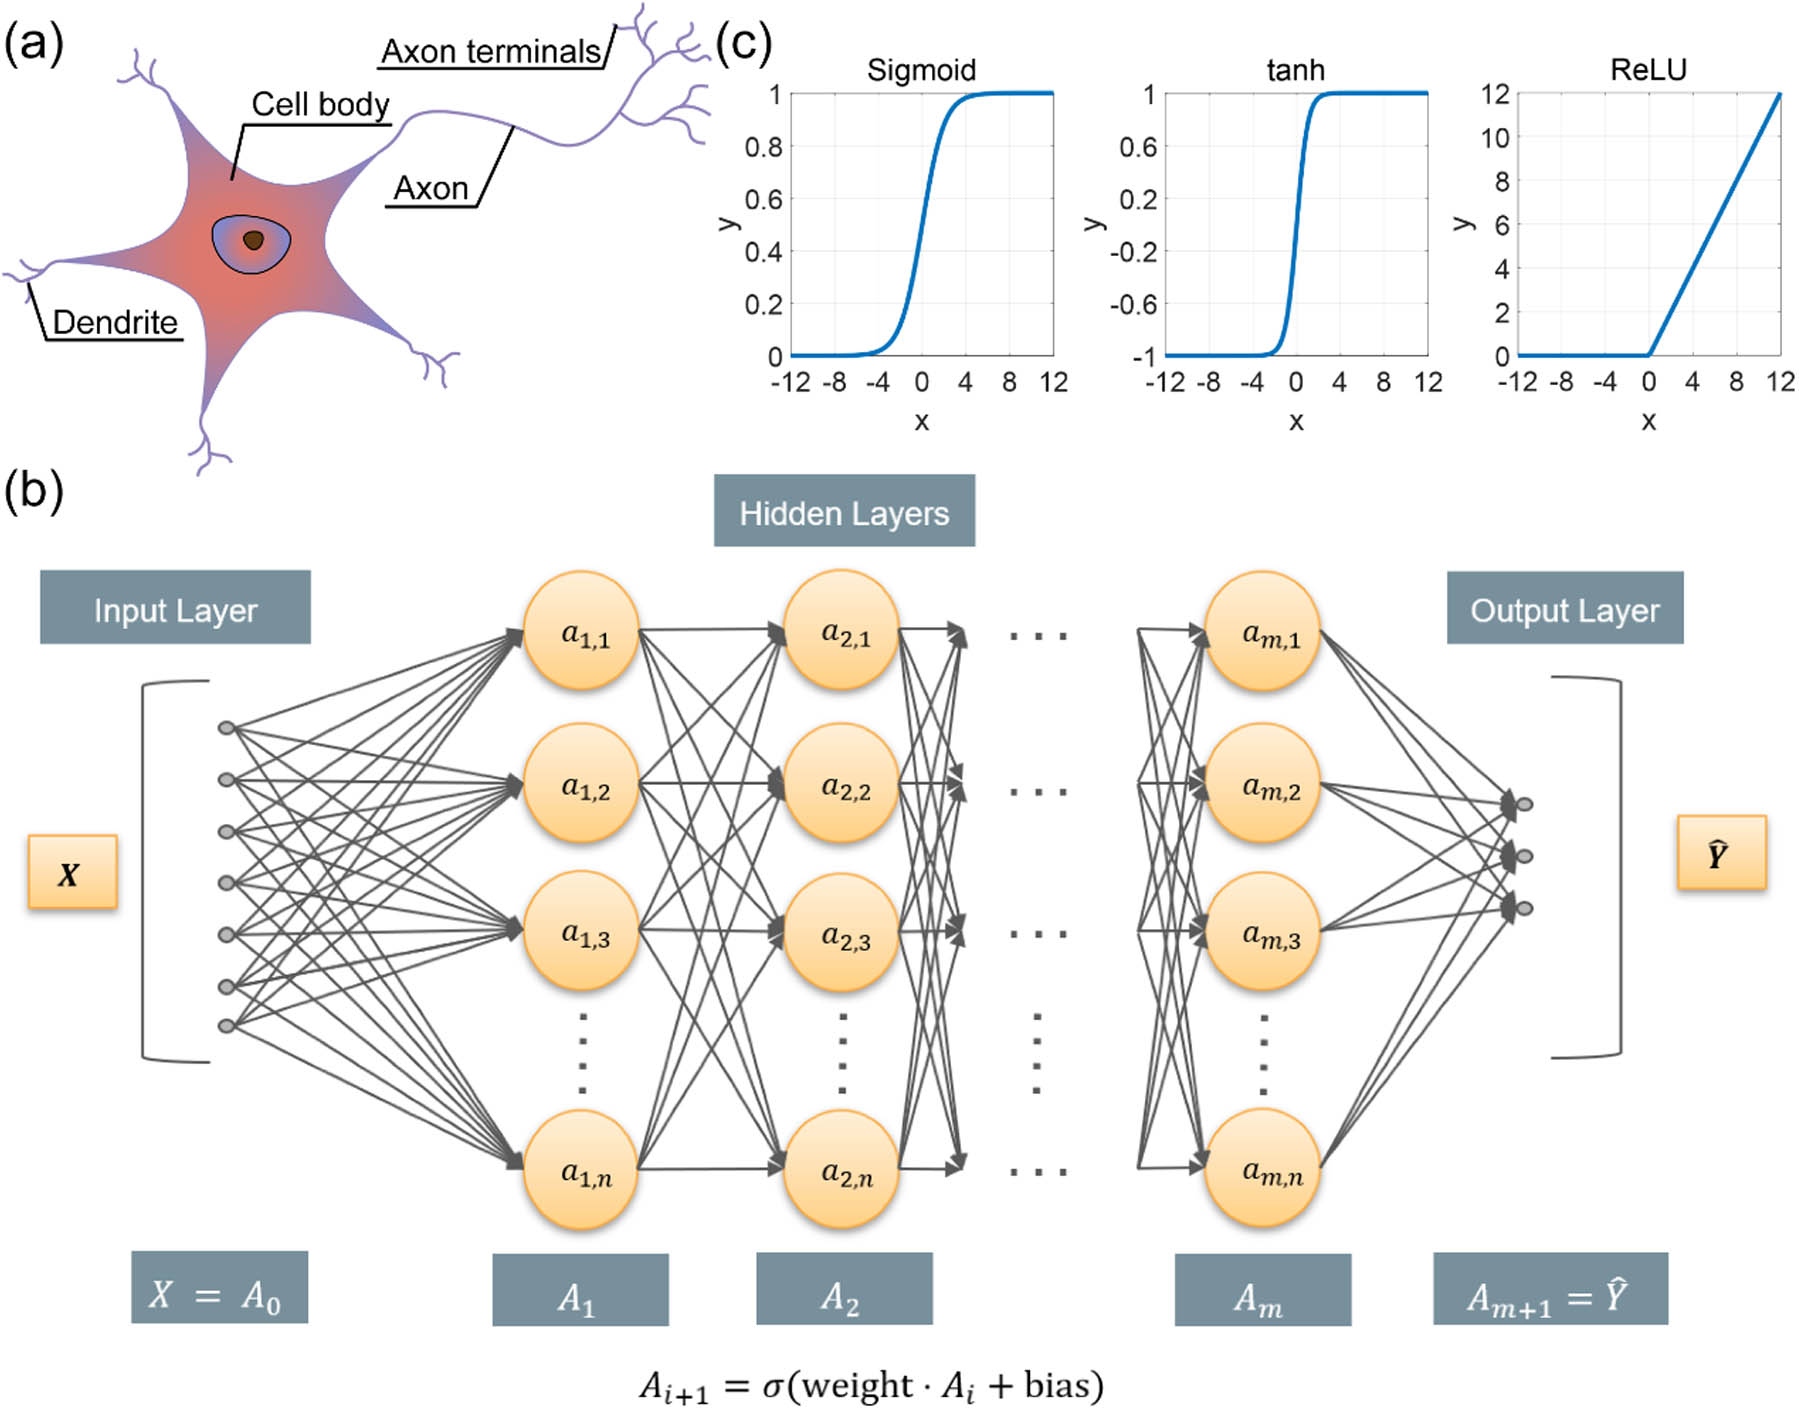 (a) Illustration of a biological neuron. (b) FCLs-based neural network, in which all neurons in adjacent layers are connected. (c) Three widely used activation functions: Sigmoid, tanh, and ReLU.